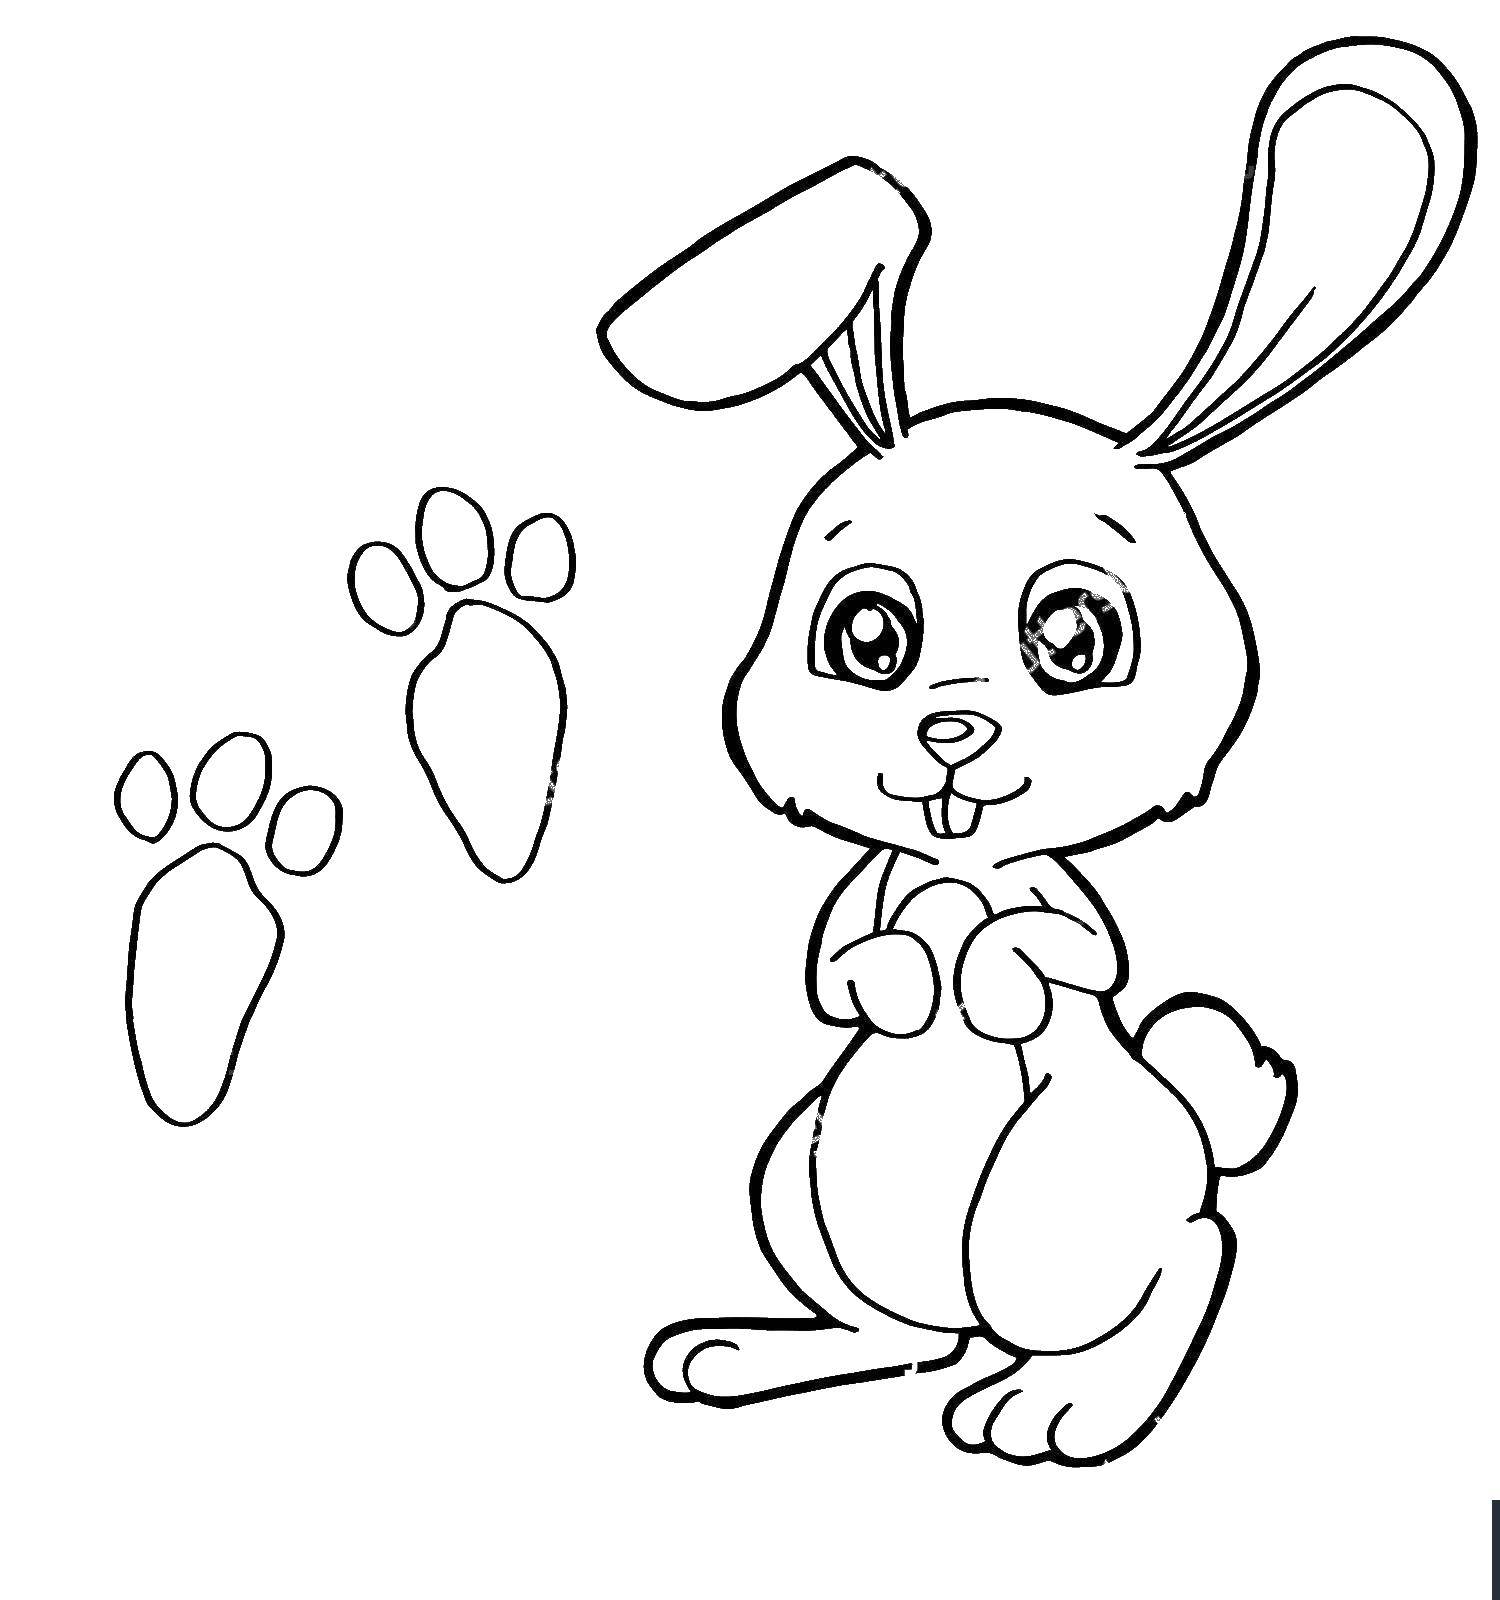 Coloring Rabbit with carrot. Category the rabbit. Tags:  rabbit, rabbit, carrot.